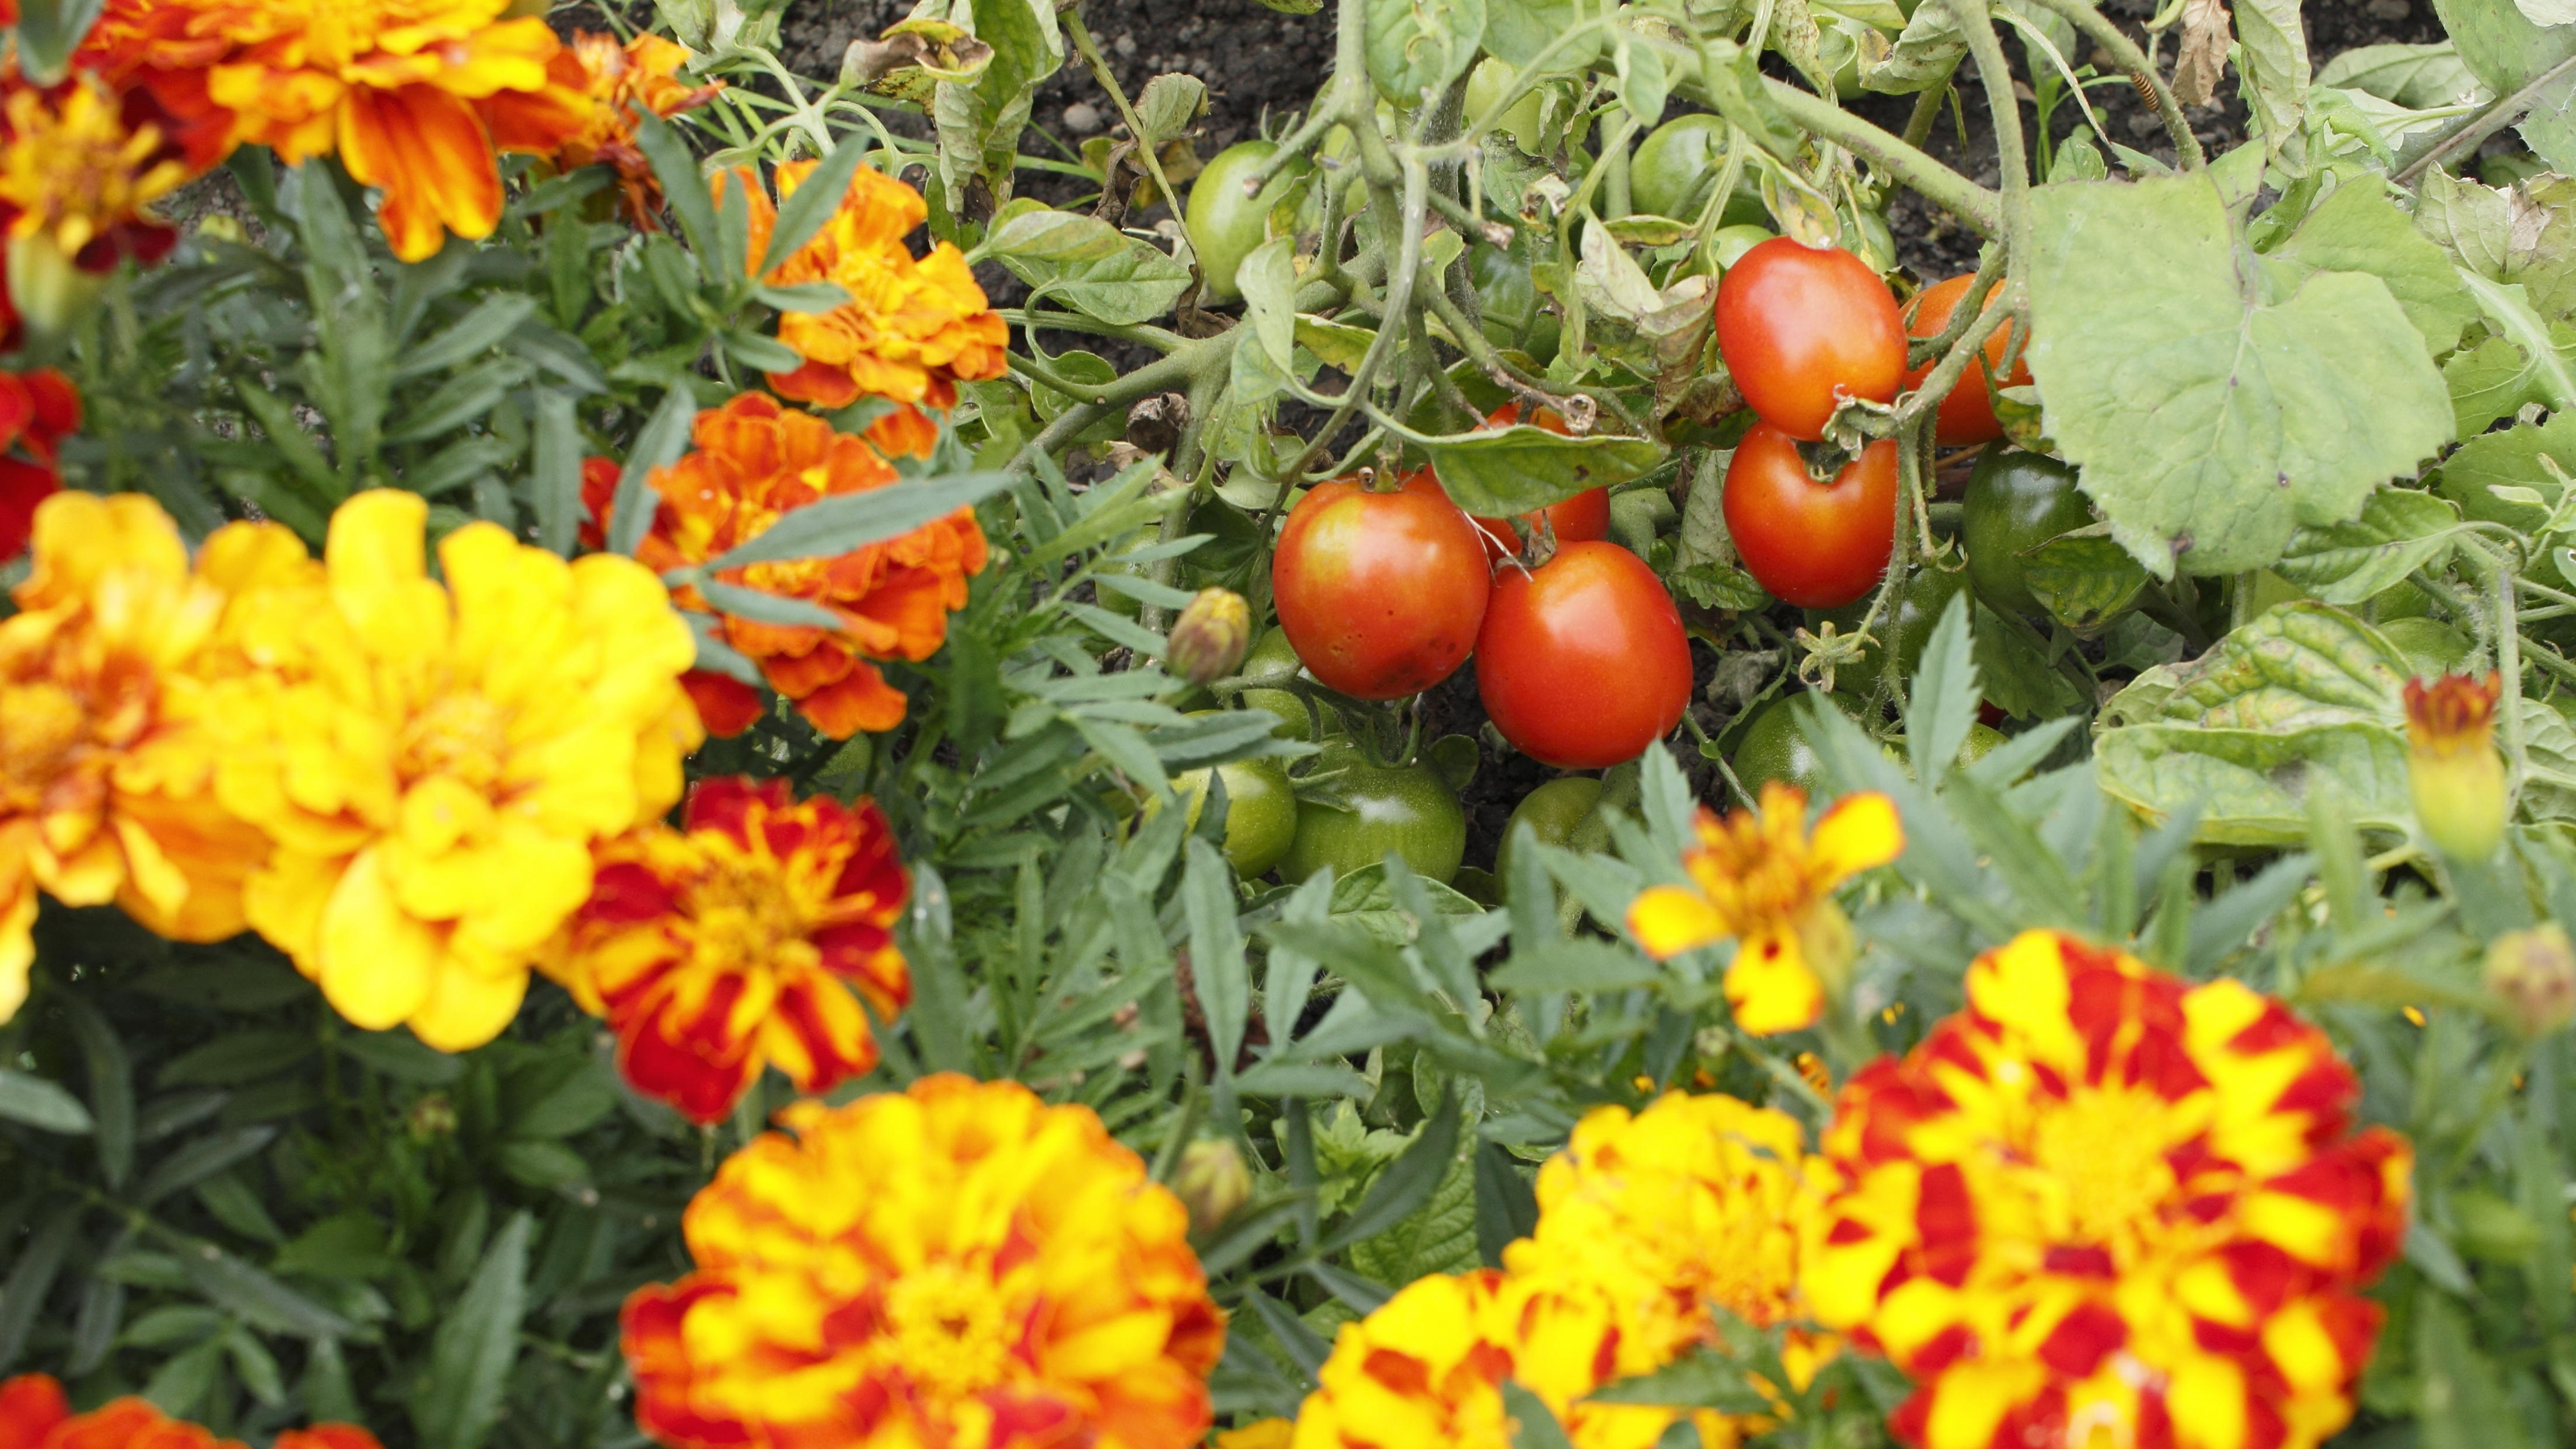 Image of Companion planting marigolds and tomatoes 1